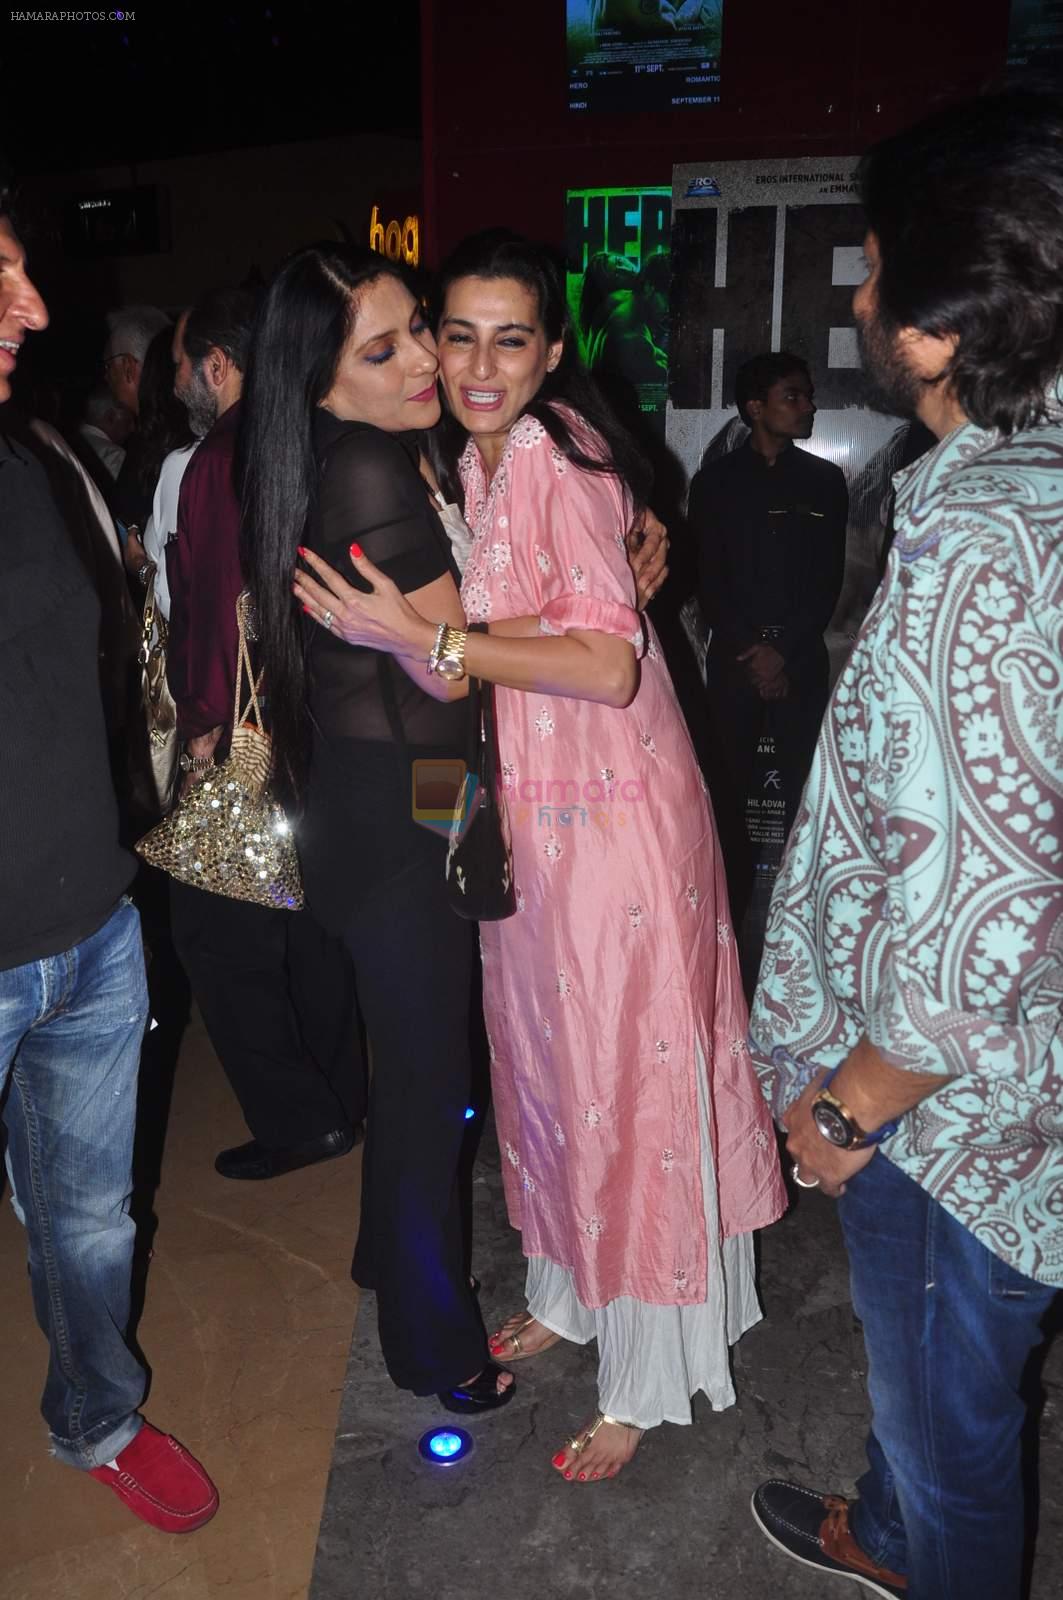 Mana Shetty, Aarti Surendranath at Hero screening hosted by Sunil and Mana Shetty in PVR on 10th Sept 2015